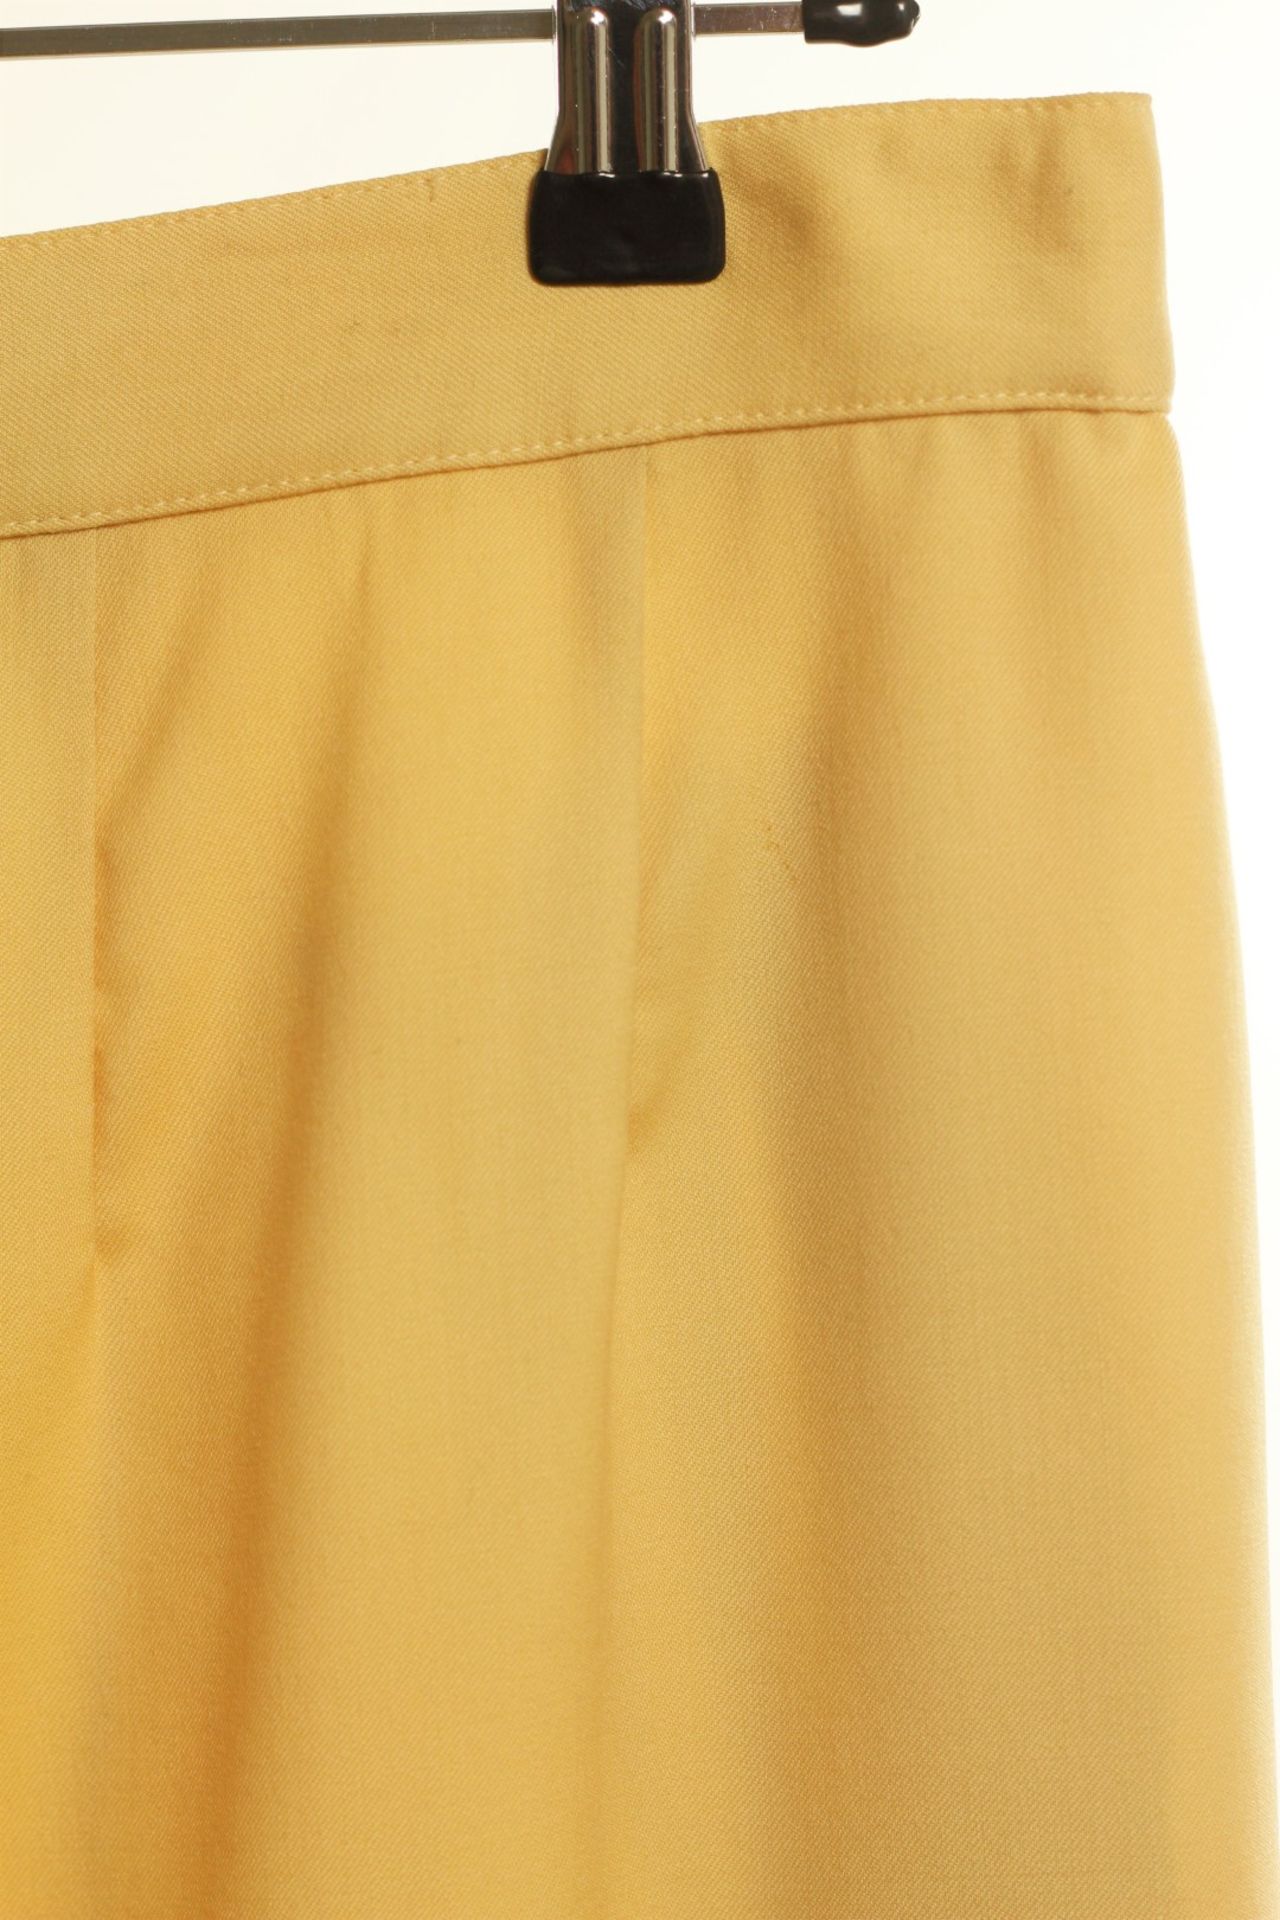 1 x Artico Cream Trousers - Size: 18 - Material: 100% Leather. Lining 50% viscose, 50% Acetate - - Image 7 of 9